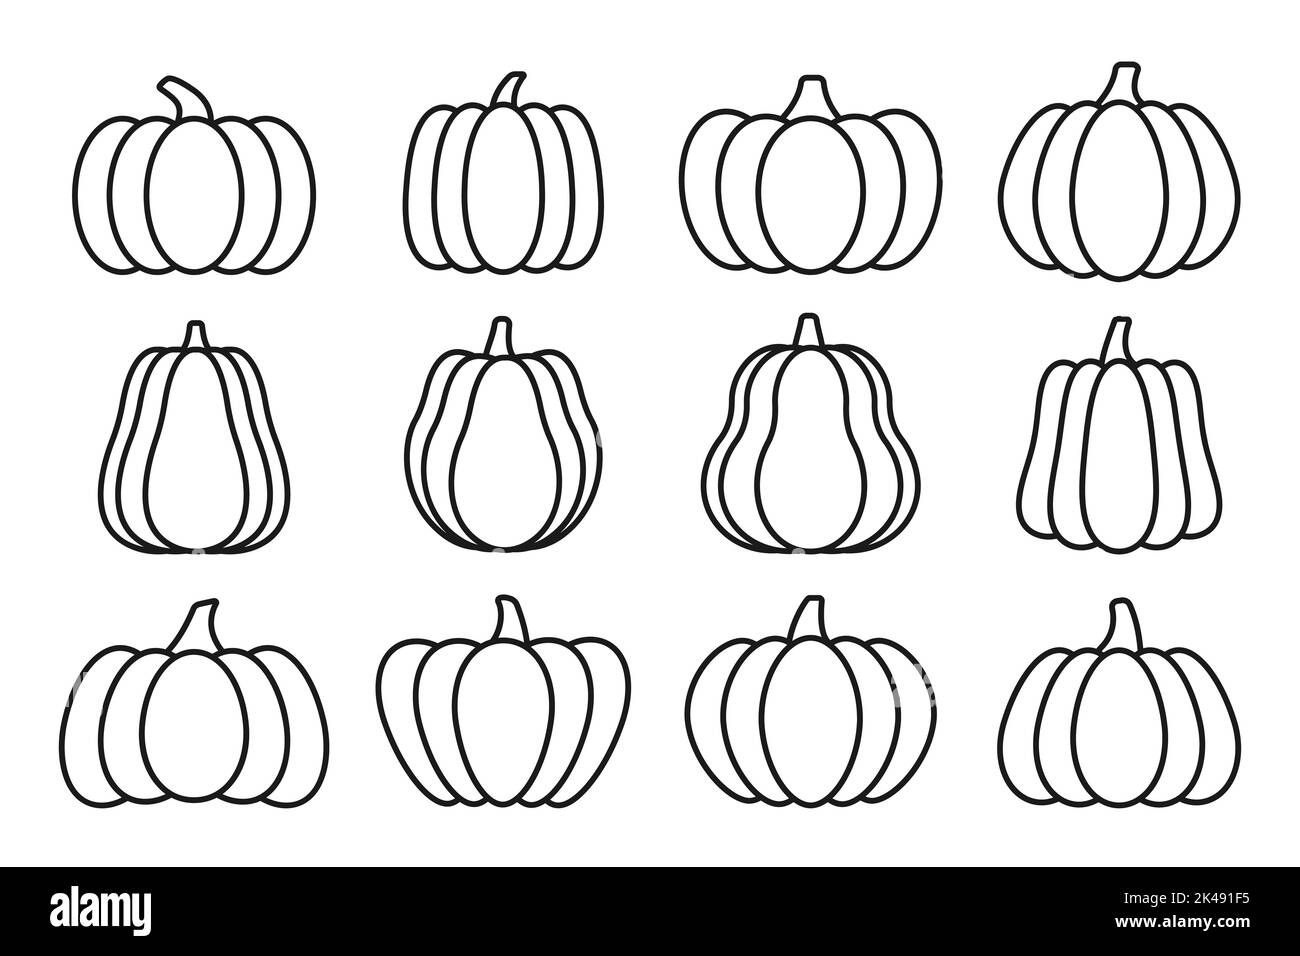 Pumpkins black line icons set. Halloween outline sign kit. Thanksgiving pictogram collection farm harvest closeup squash vegetable. Simple pumpkin cartoon contour coloring book page isolated on white Stock Vector